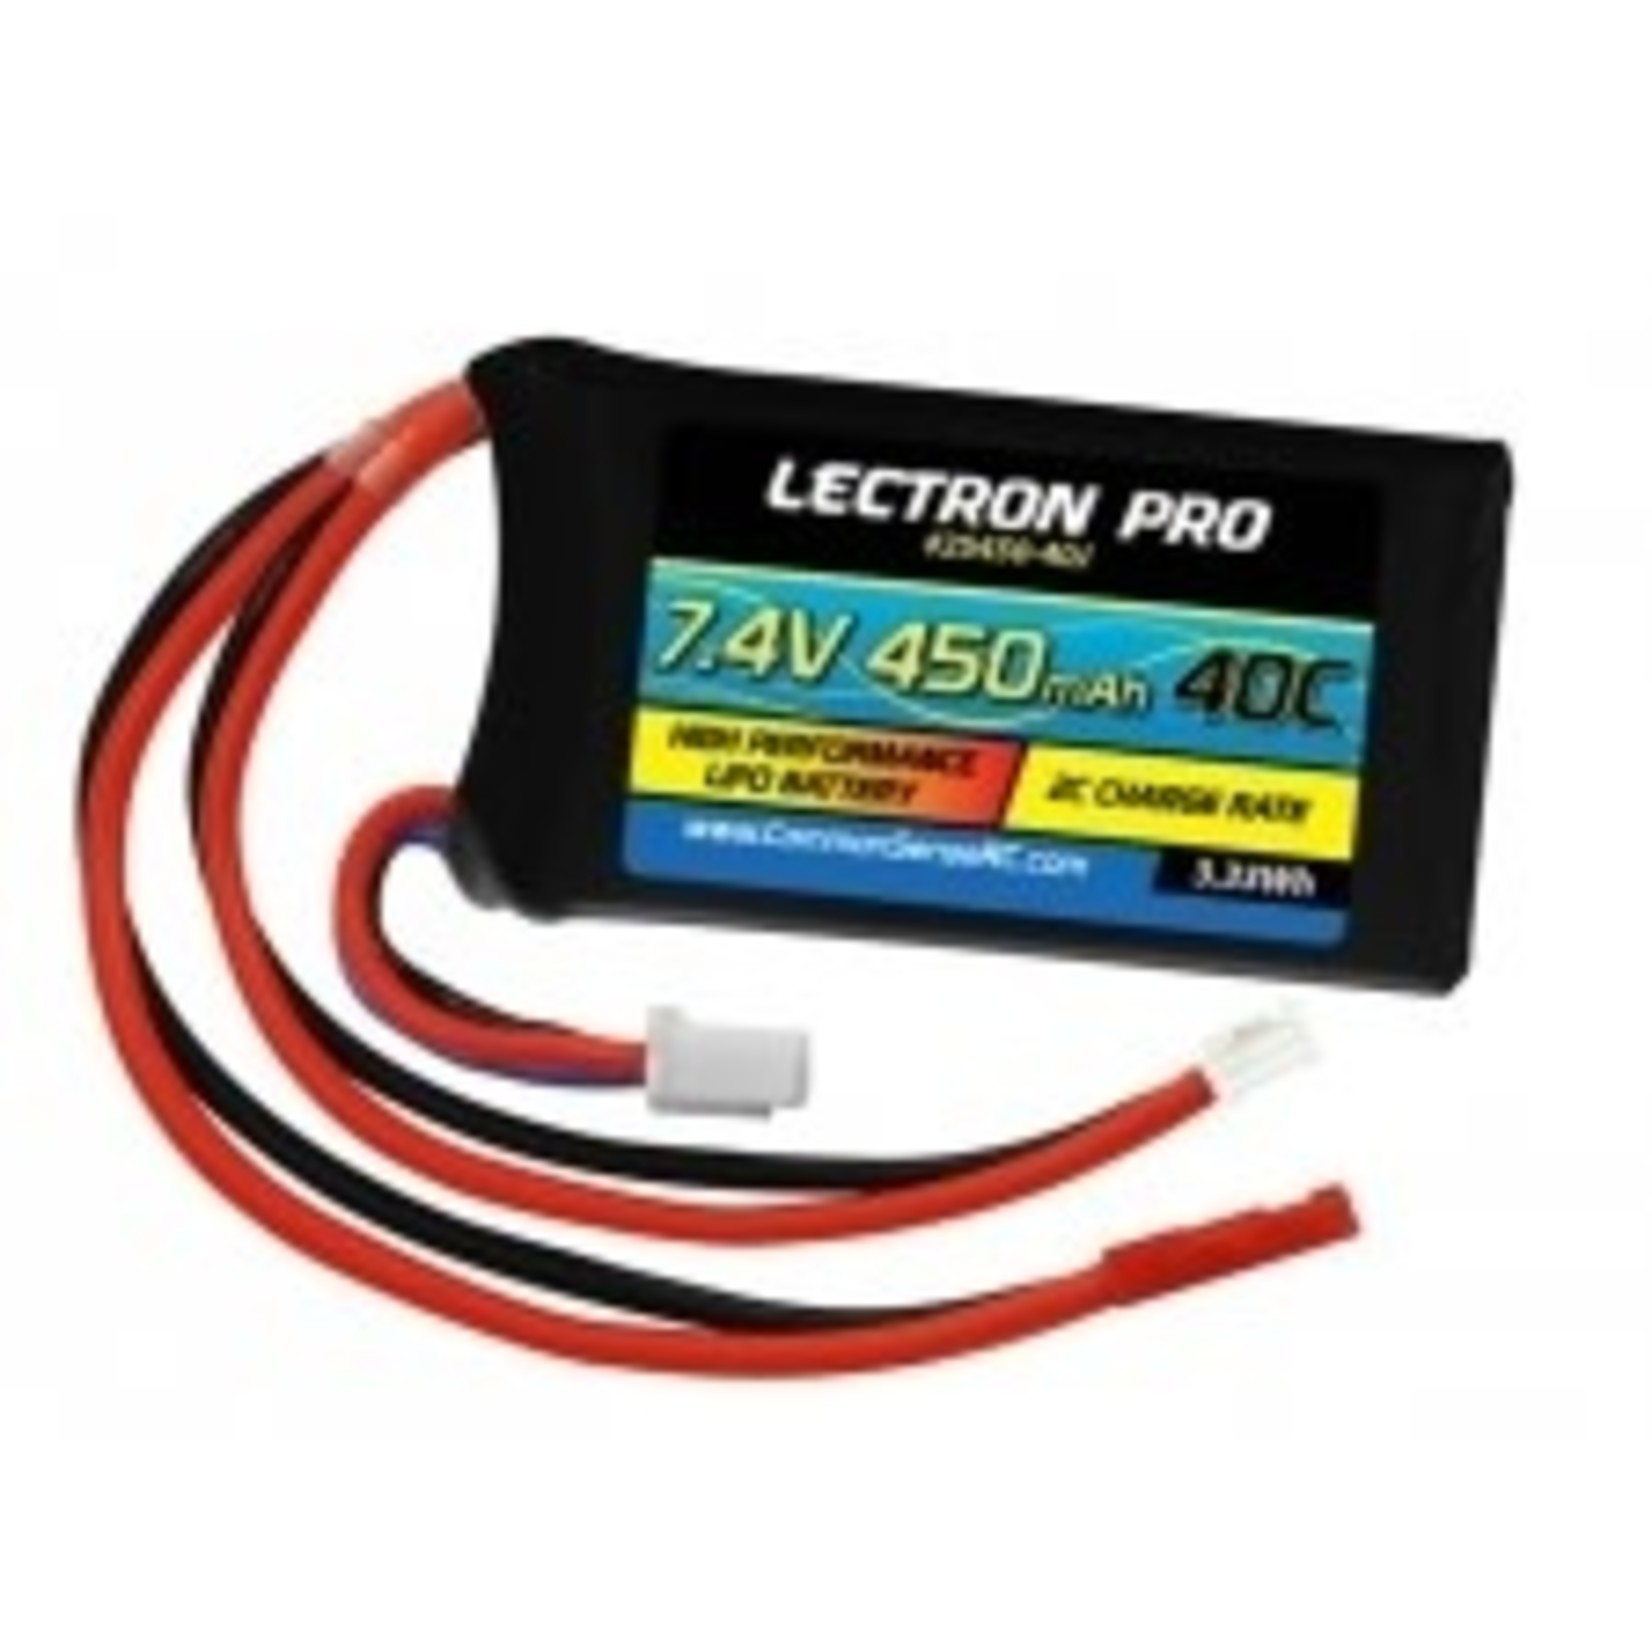 Common Sense RC Lectron Pro 7.4V 450mAh 40C Lipo Battery with JST PH 2.0 connector for Axial SCX24